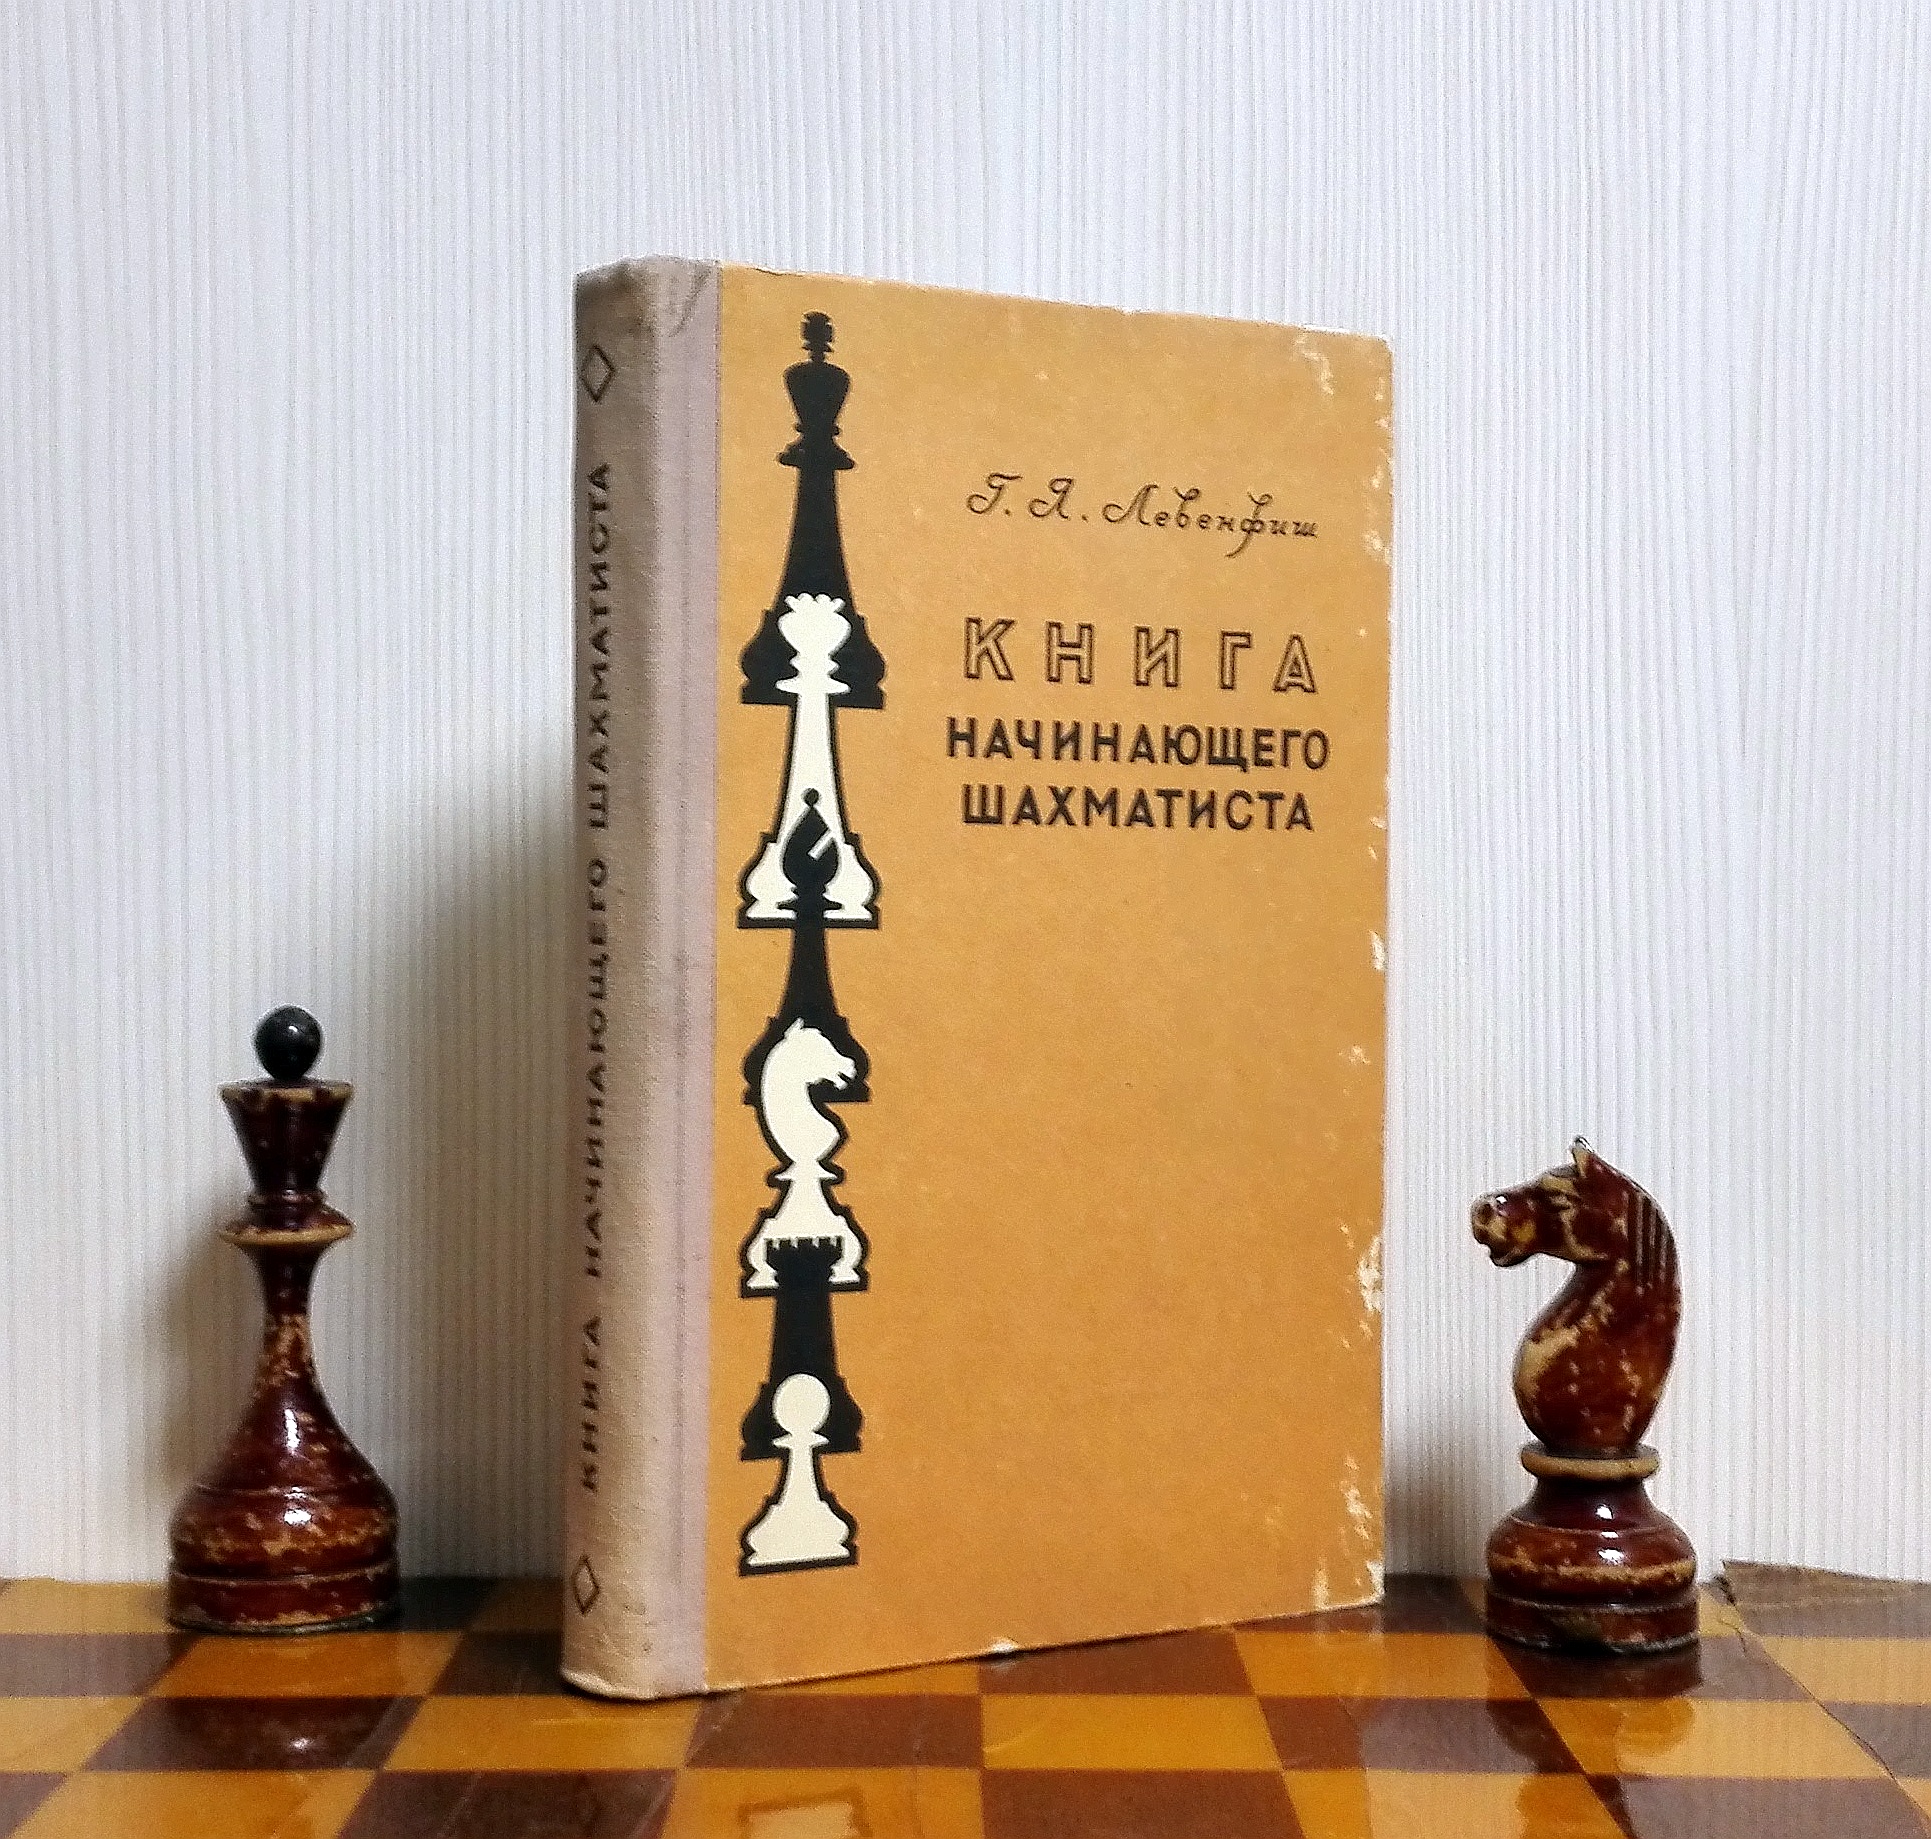 Shop Chess Books and Collectibles